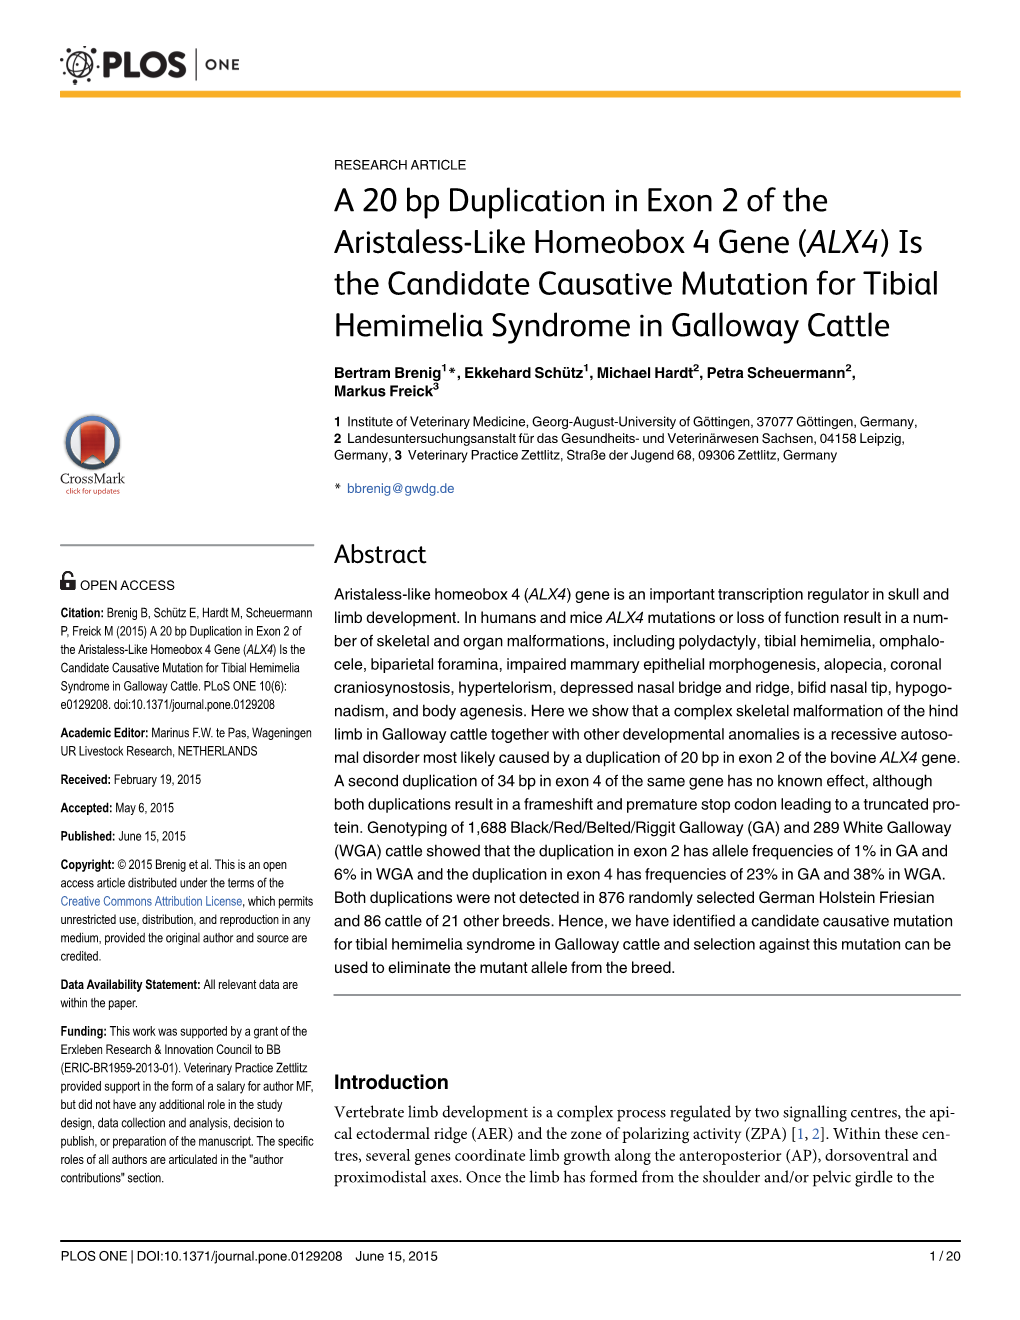 A 20 Bp Duplication in Exon 2 of the Aristaless-Like Homeobox 4 Gene (ALX4)Is the Candidate Causative Mutation for Tibial Hemimelia Syndrome in Galloway Cattle